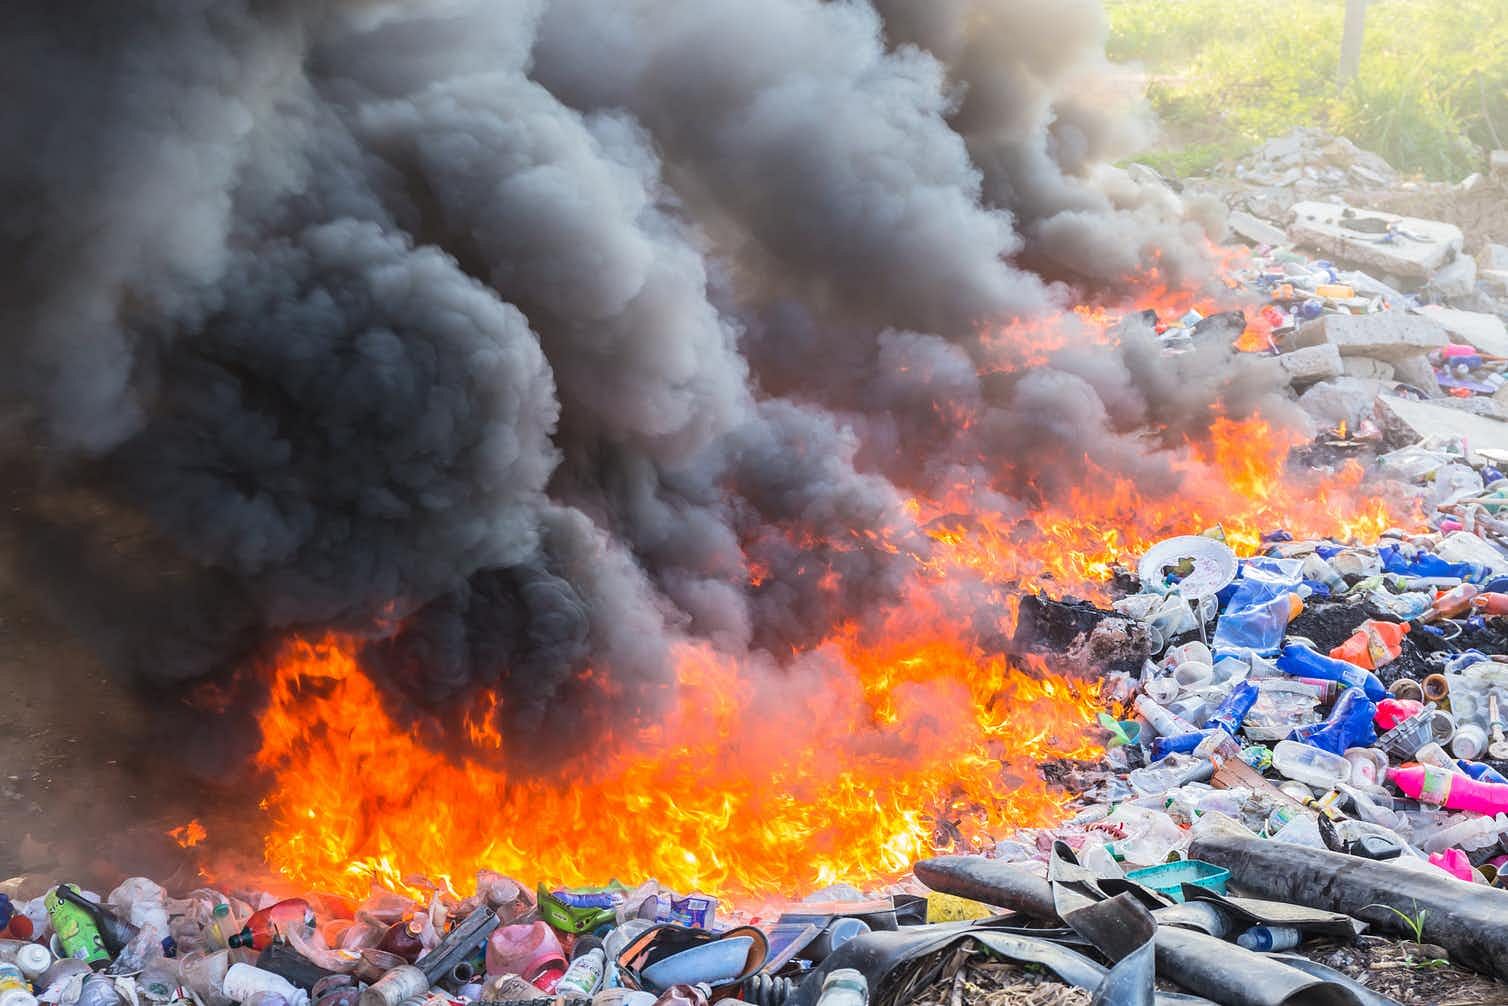 Ignition of trapped methane pockets in landfills can set off massive fires, releasing the carbon stored in plastic.